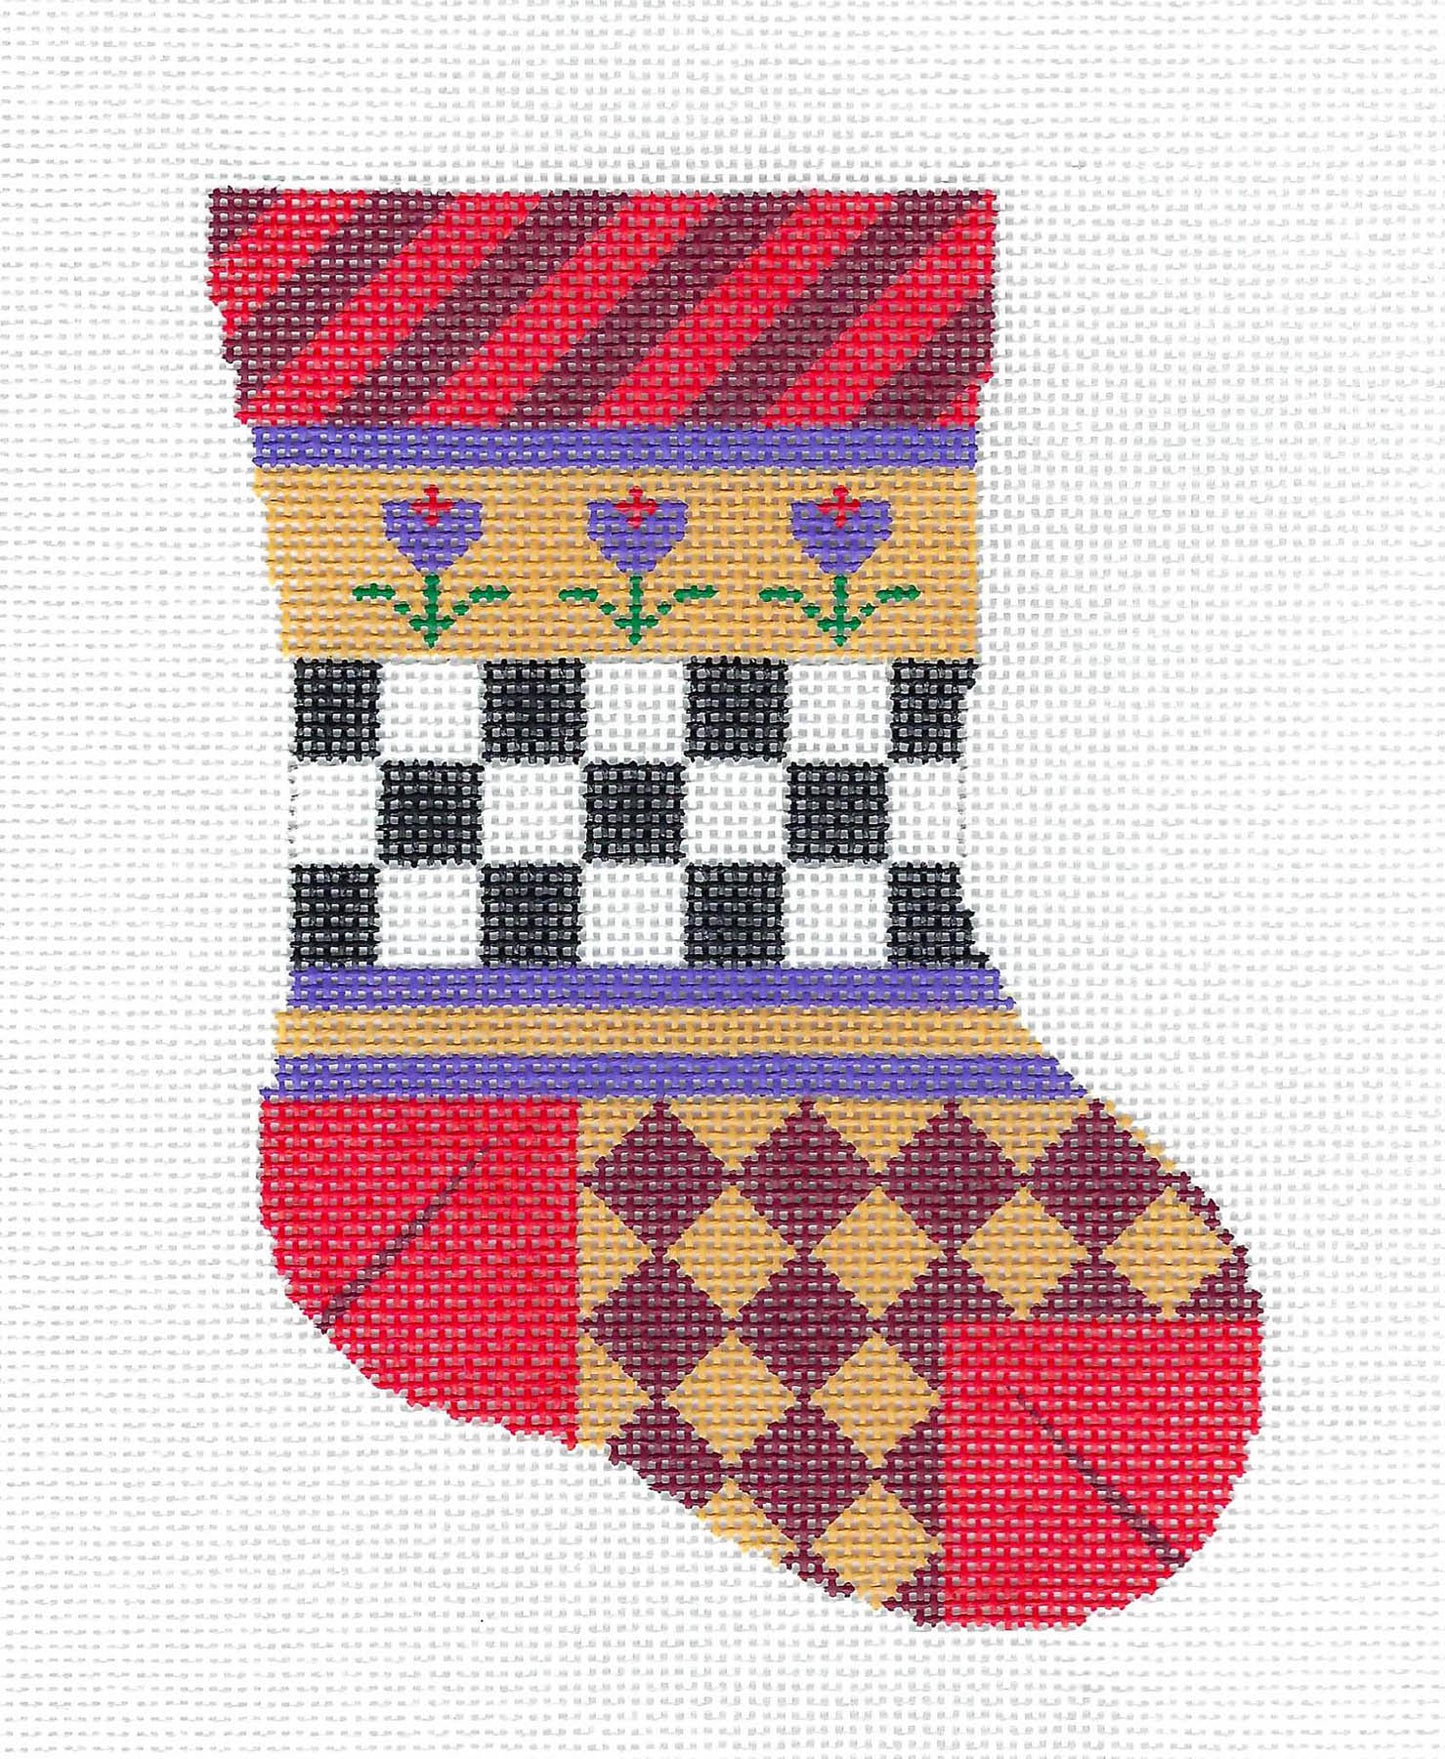 Stocking ~ Christmas Patchwork Mini Stocking Ornament Handpainted Needlepoint Canvas by Silver Needle